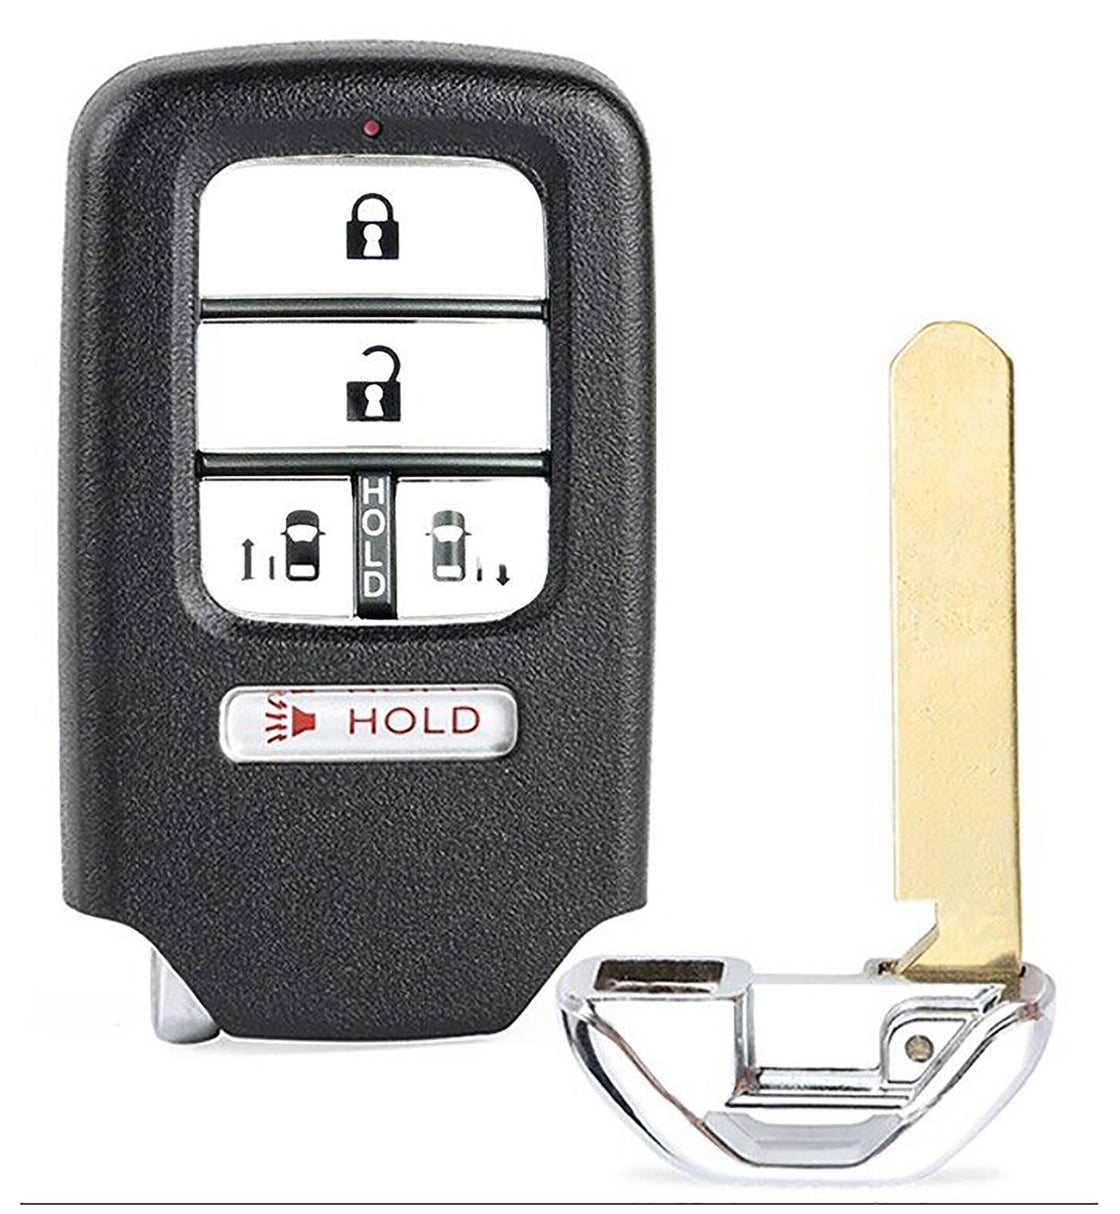 1x New Replacement Proximity Remote Key Fob Compatible with & Fit For Honda Vehicles KR5V1X - MPN KR5V1X-06